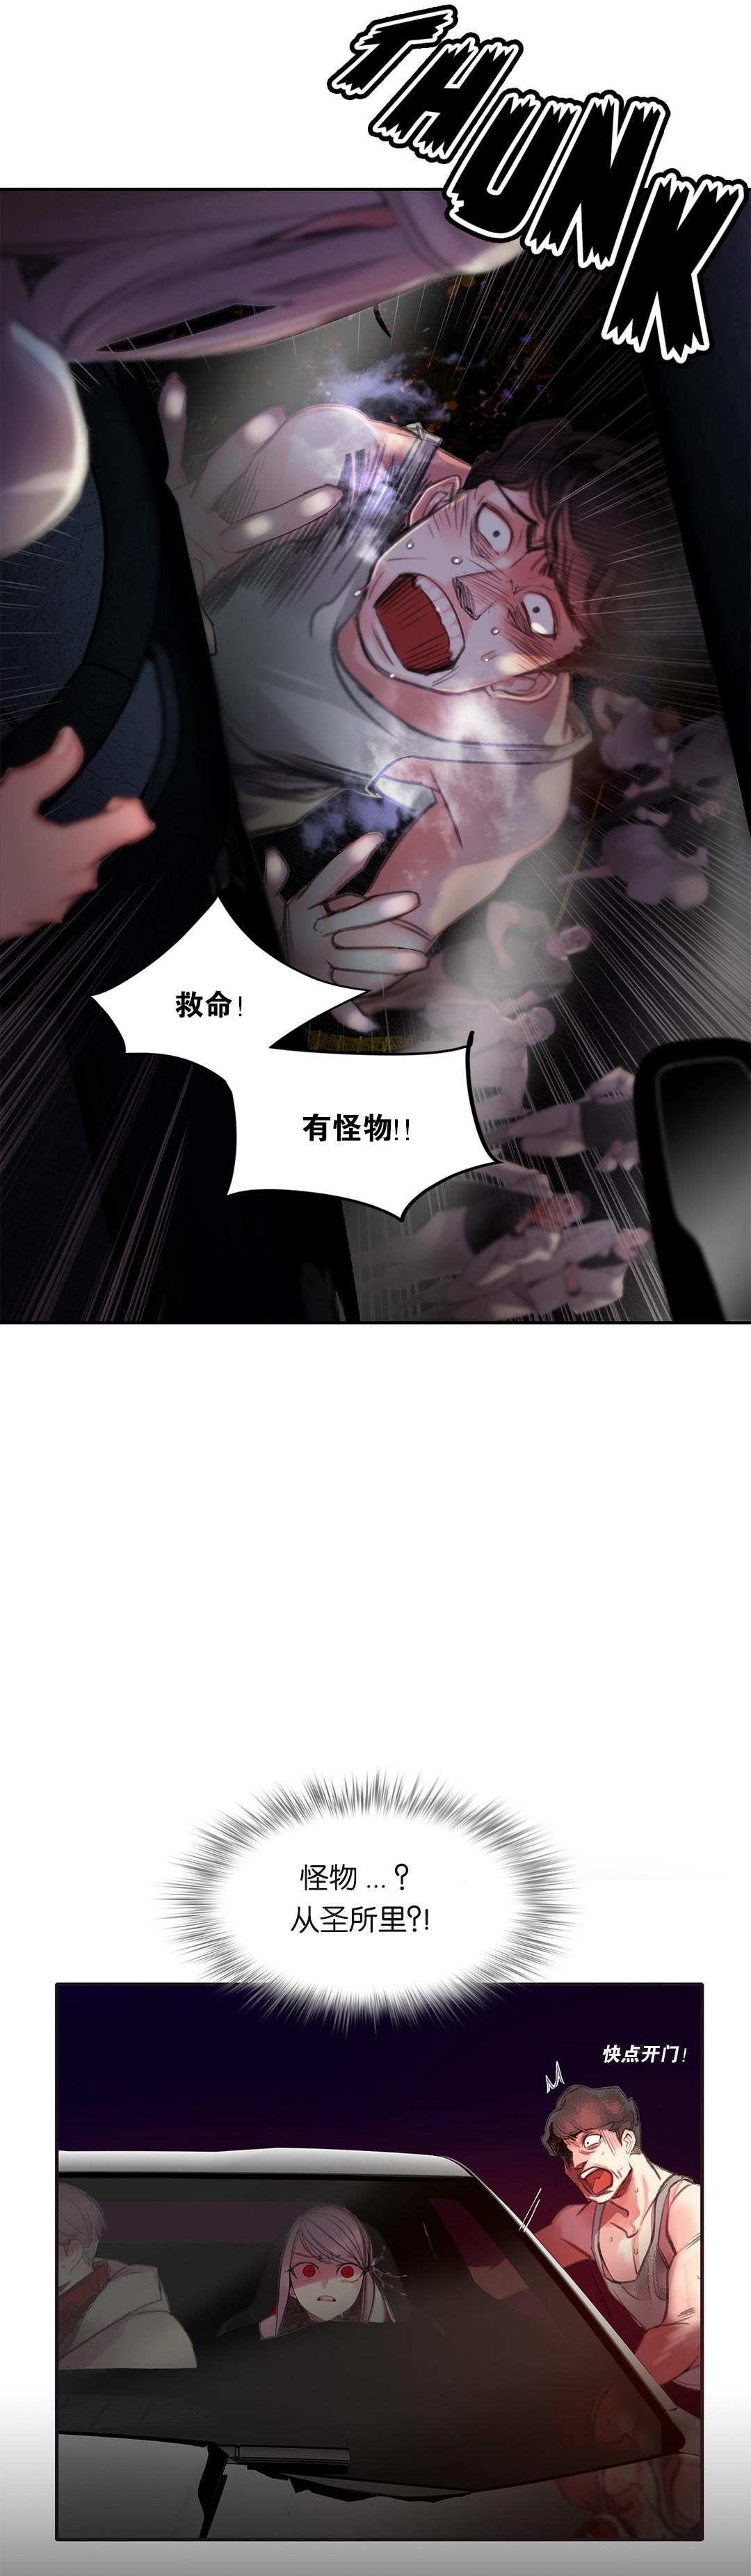 [Juder] Lilith`s Cord (第二季) Ch.61-67 [Chinese] [aaatwist个人汉化] [Ongoing] 14